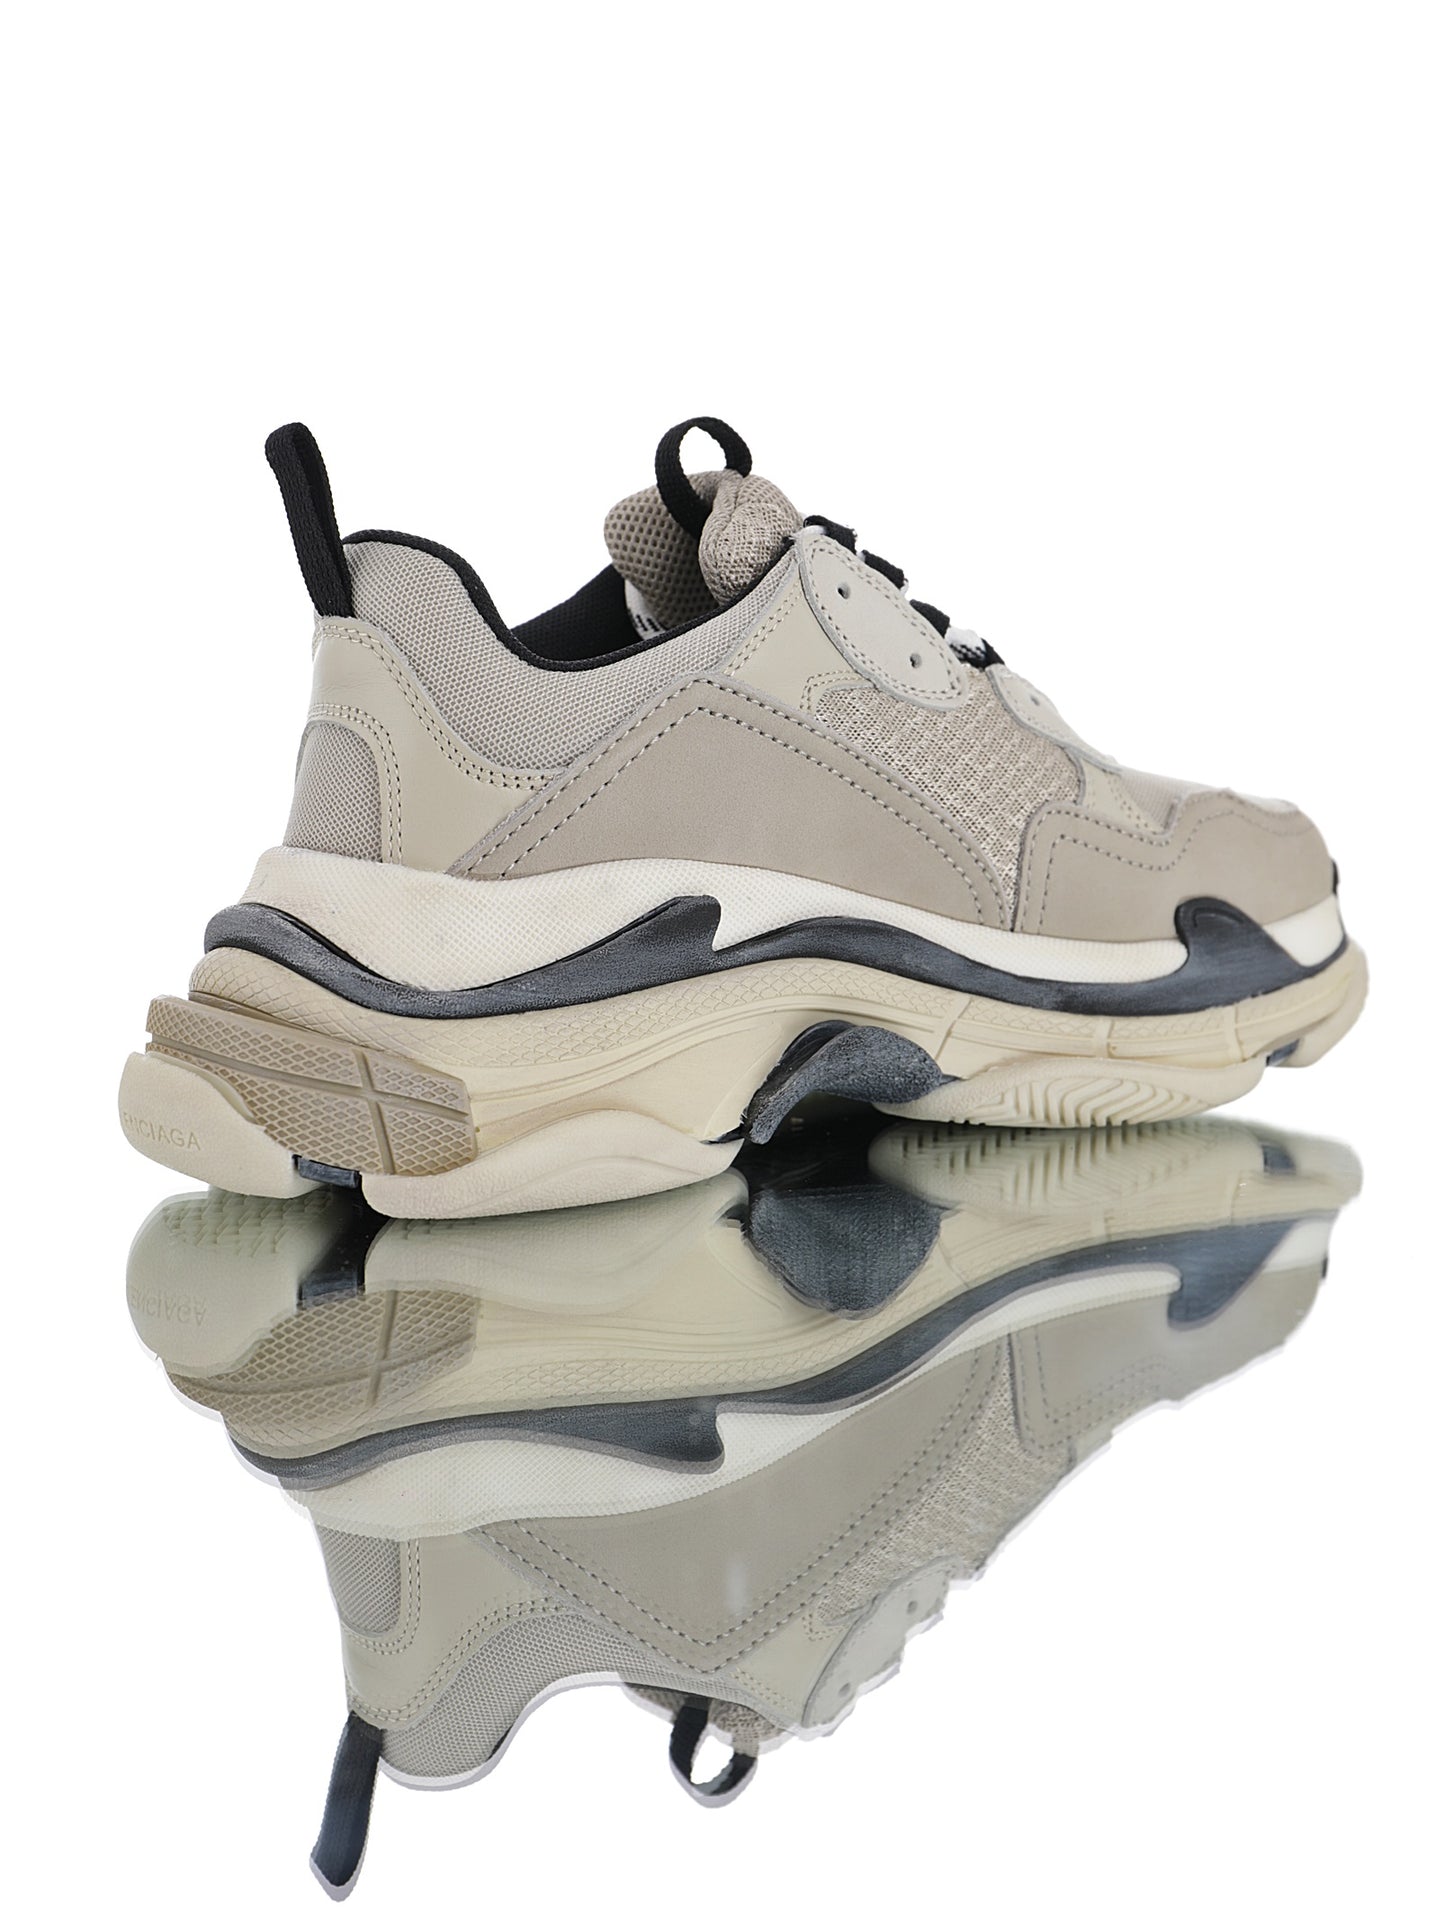 Triple s Vanille solid sole - whatever on 